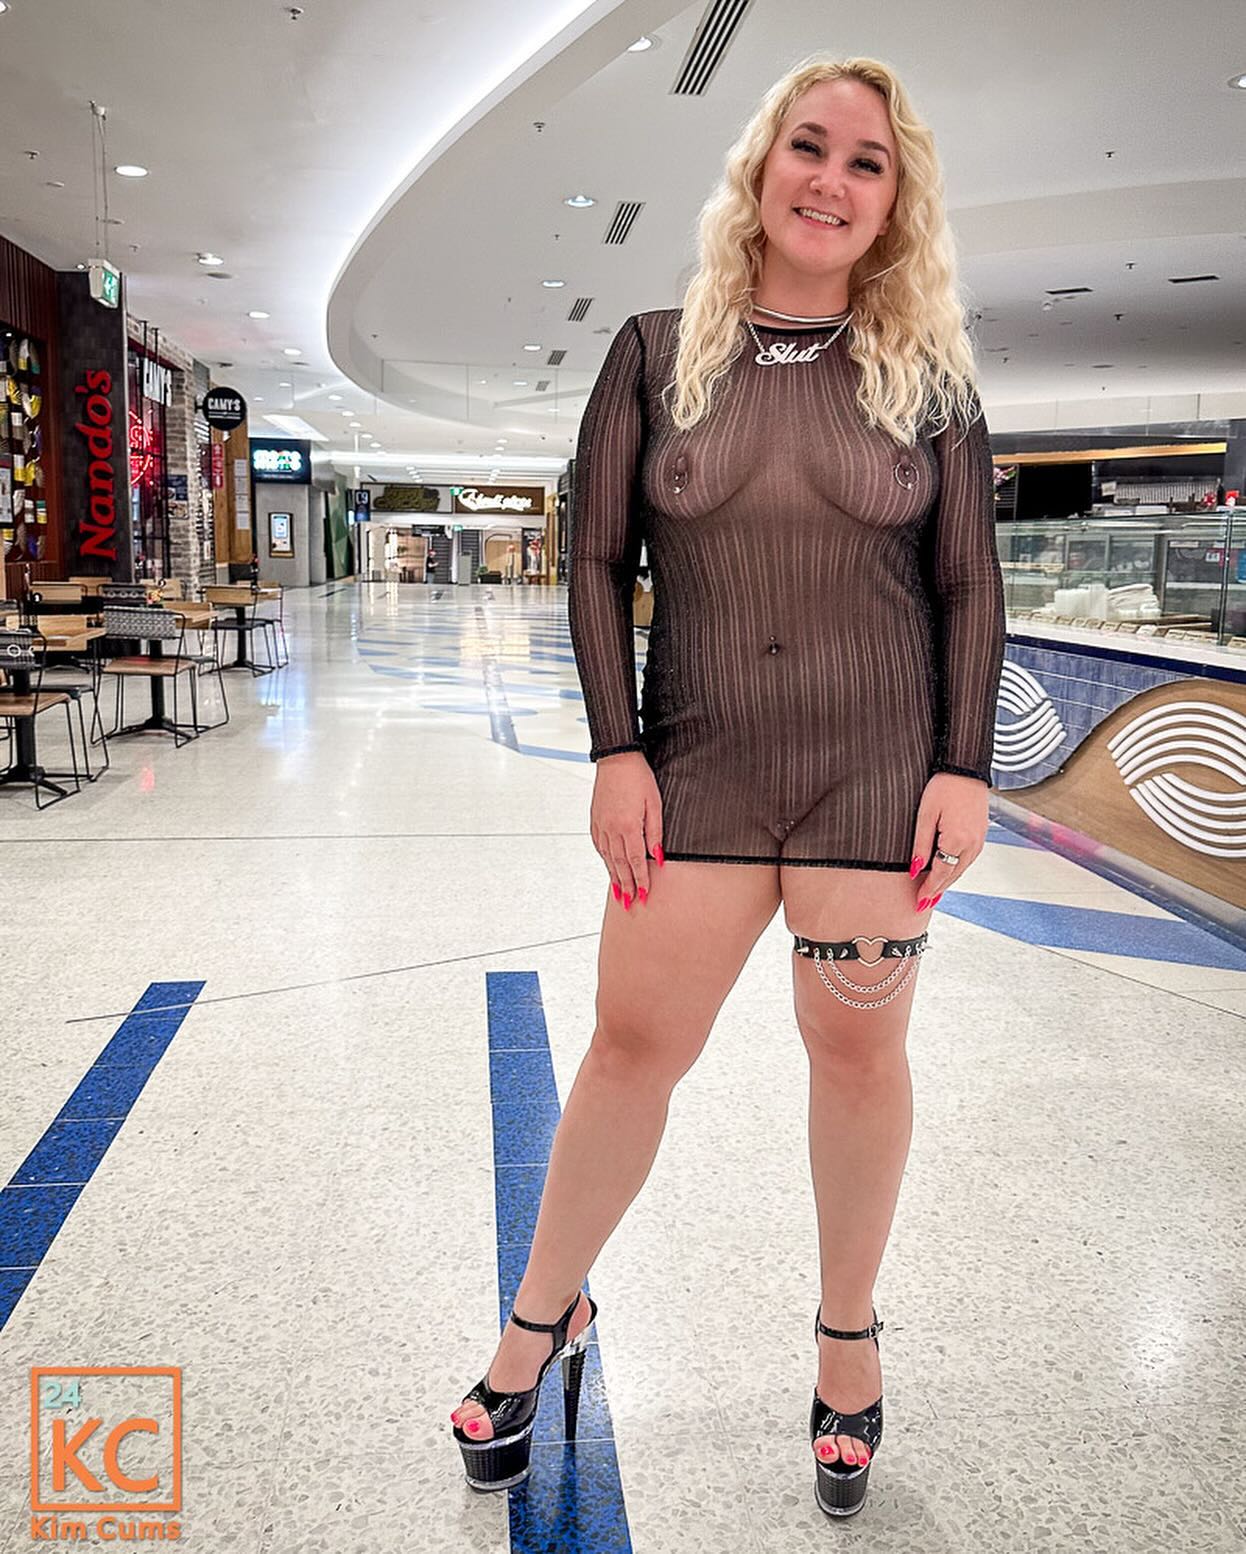 ➡️Happy Hour at the Shopping Centre⬅️📸2️⃣0️⃣
.
New gallery on @microminimus 😍
.
What’s your favourite part of my outfit?